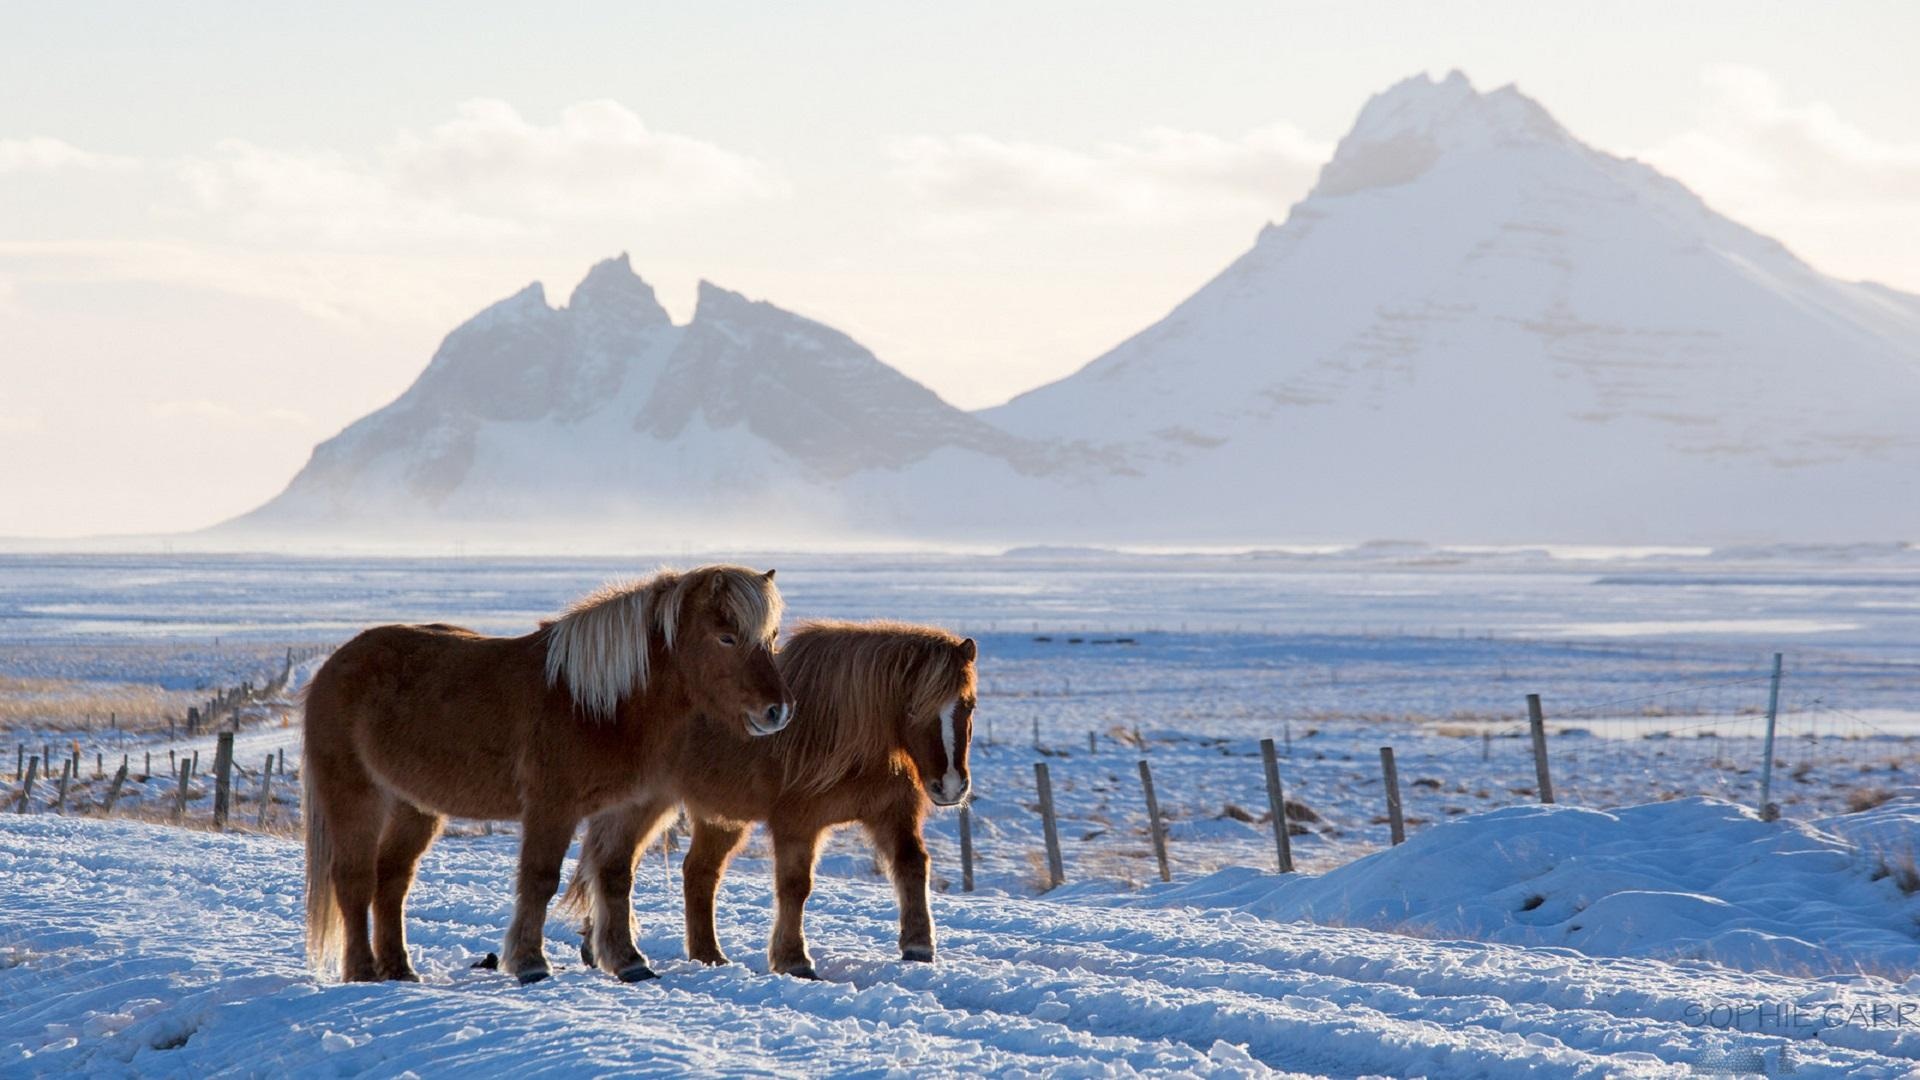 Horses in the Snow, Icelandic horse wallpapers, collection, 1920x1080 Full HD Desktop